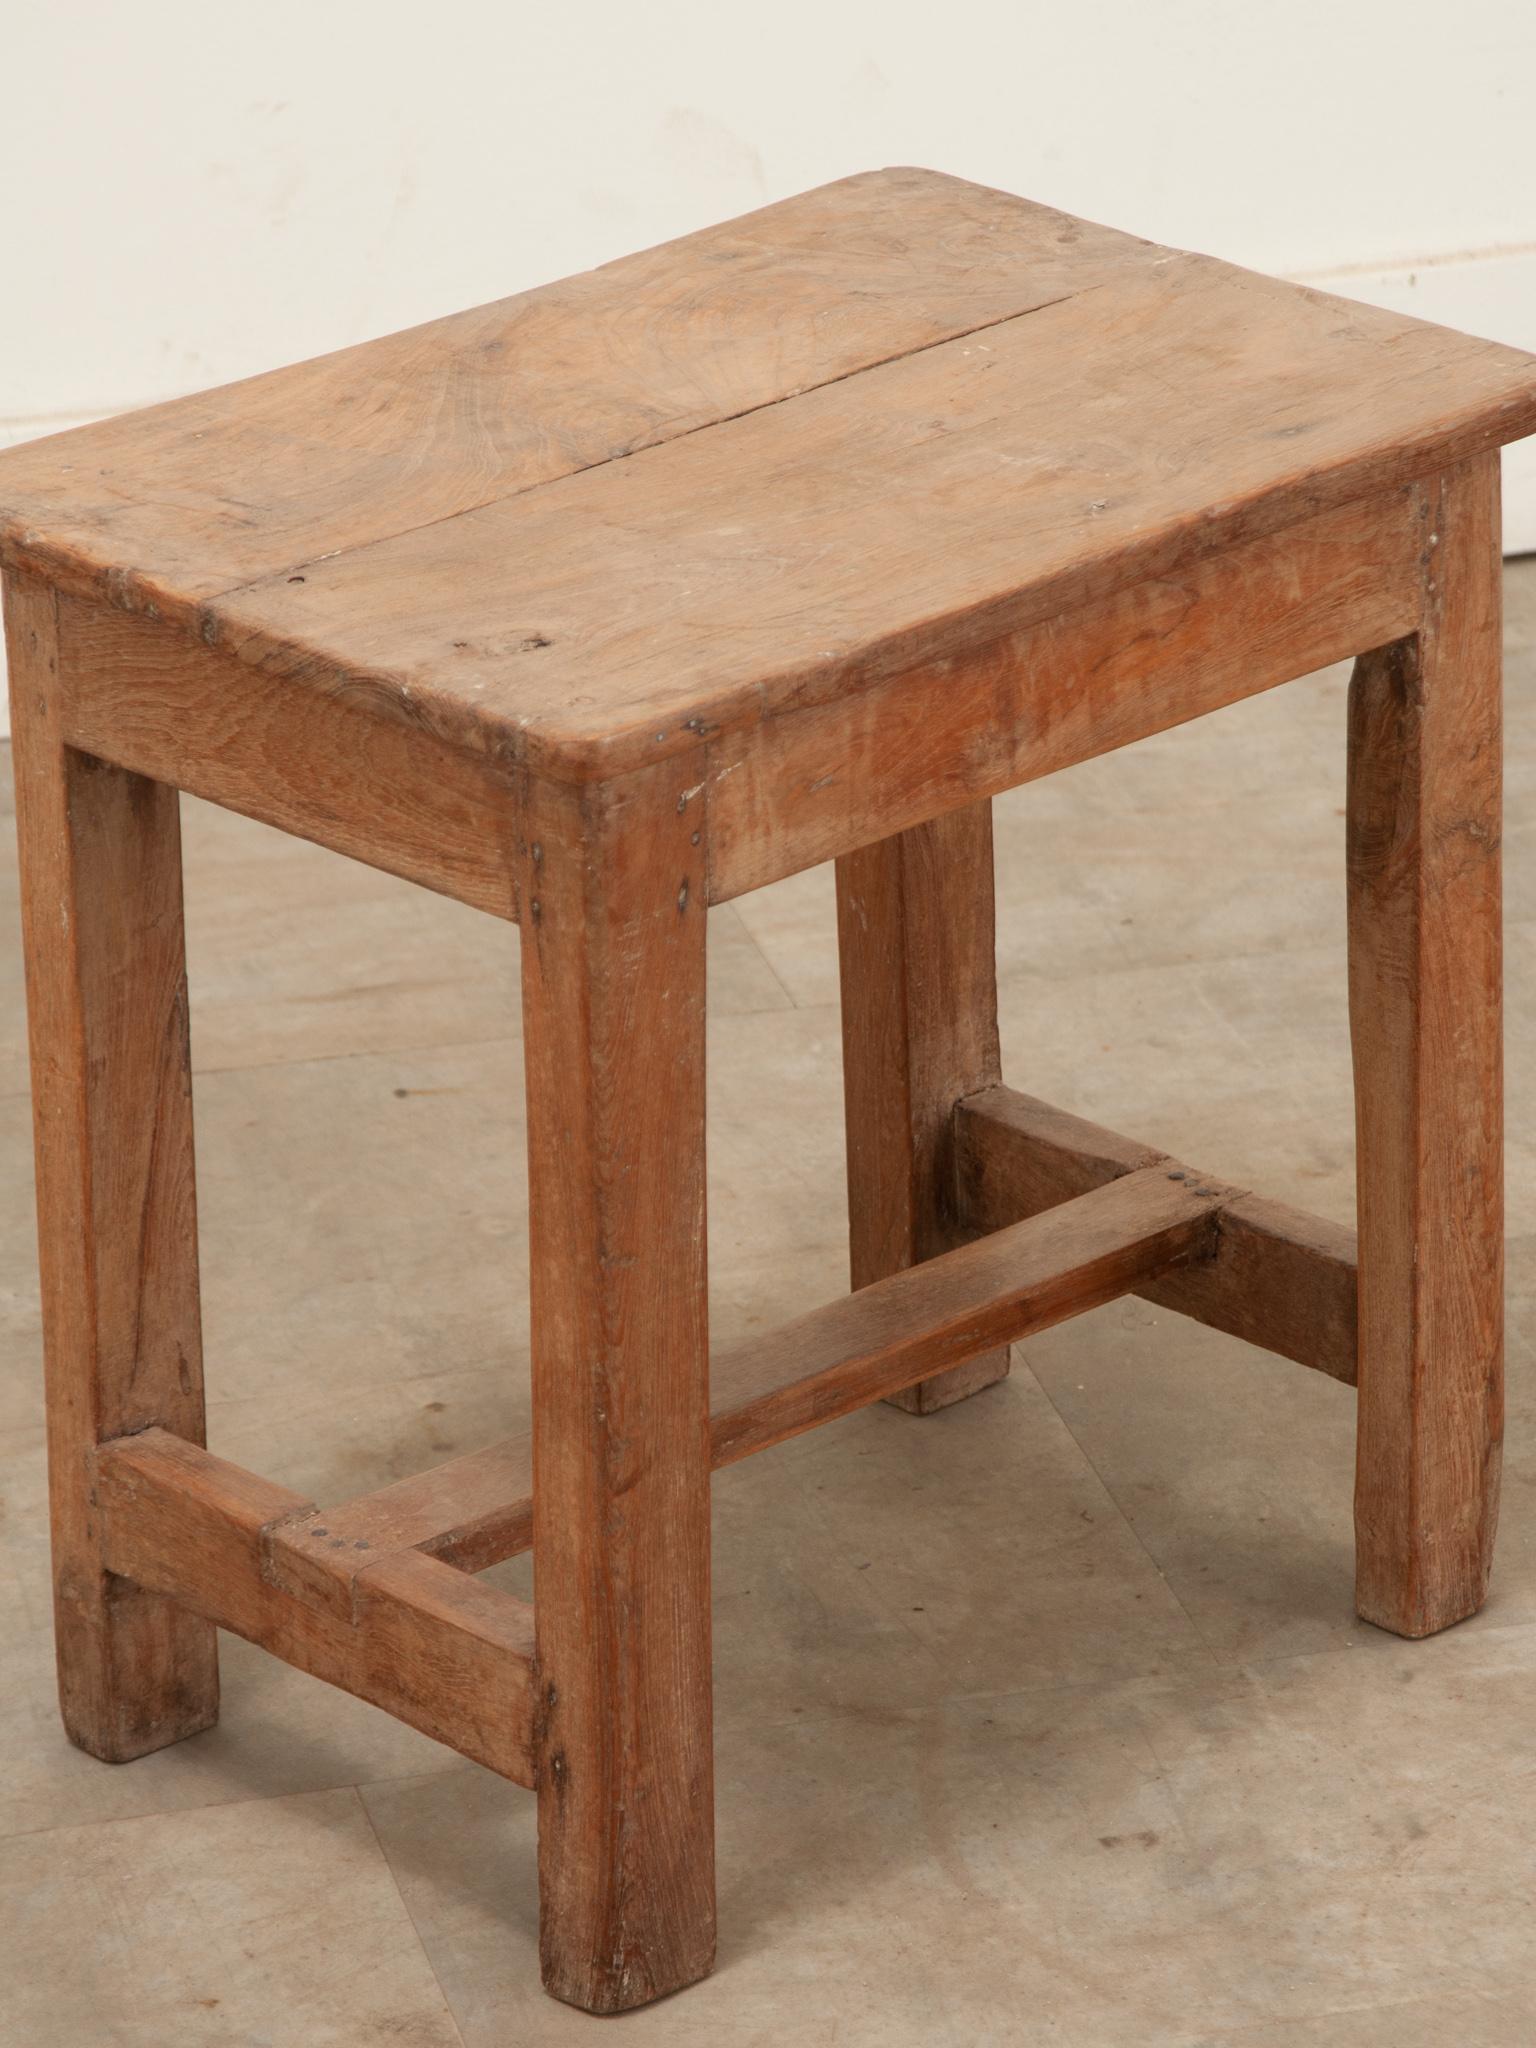 French 19th Century Pine Stool In Good Condition For Sale In Baton Rouge, LA